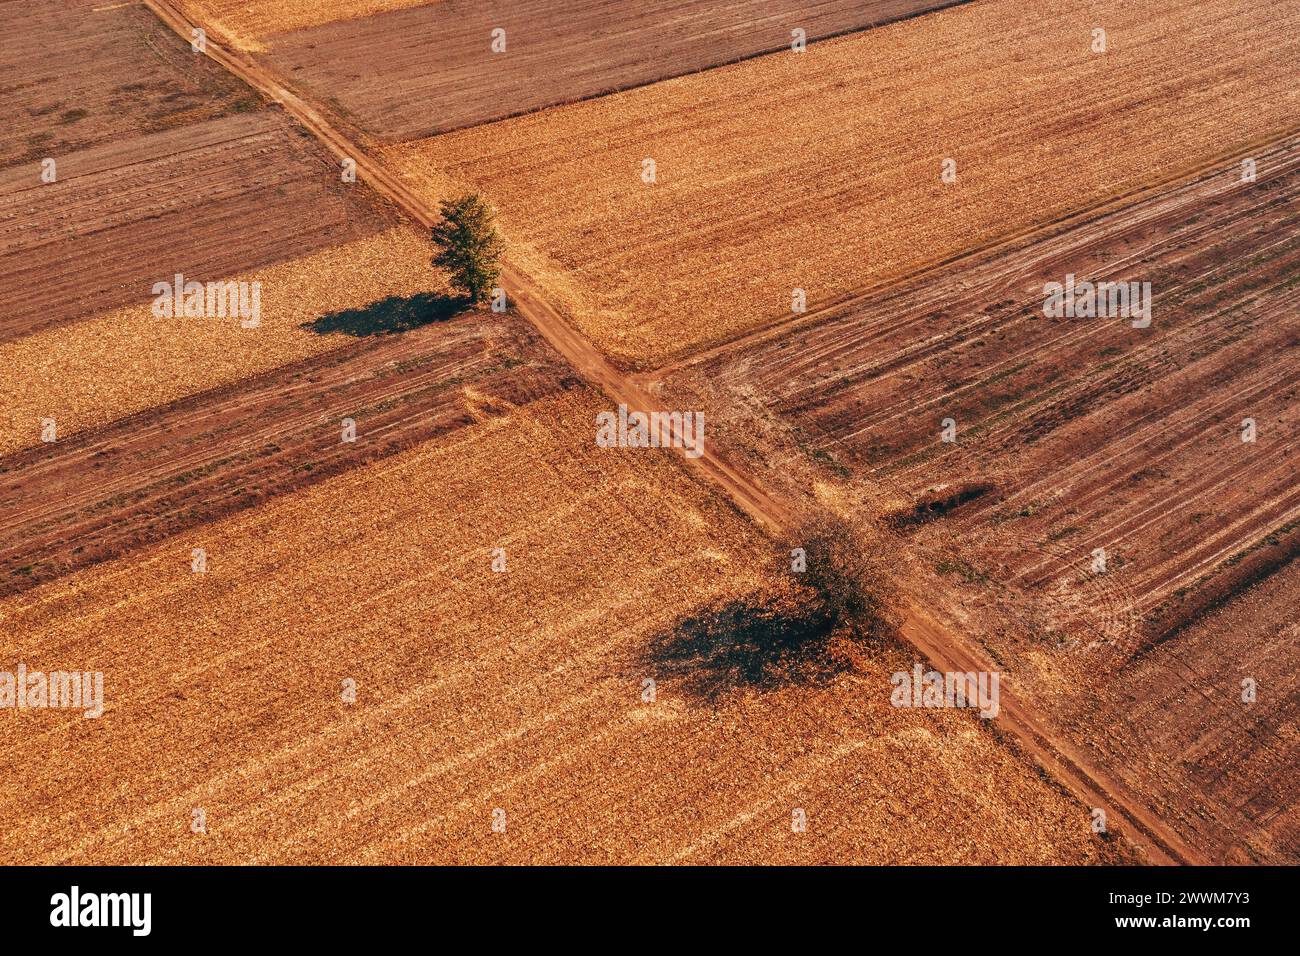 Aerial shot of two trees and the dirt road through cultivated landscape, drone pov high angle view Stock Photo